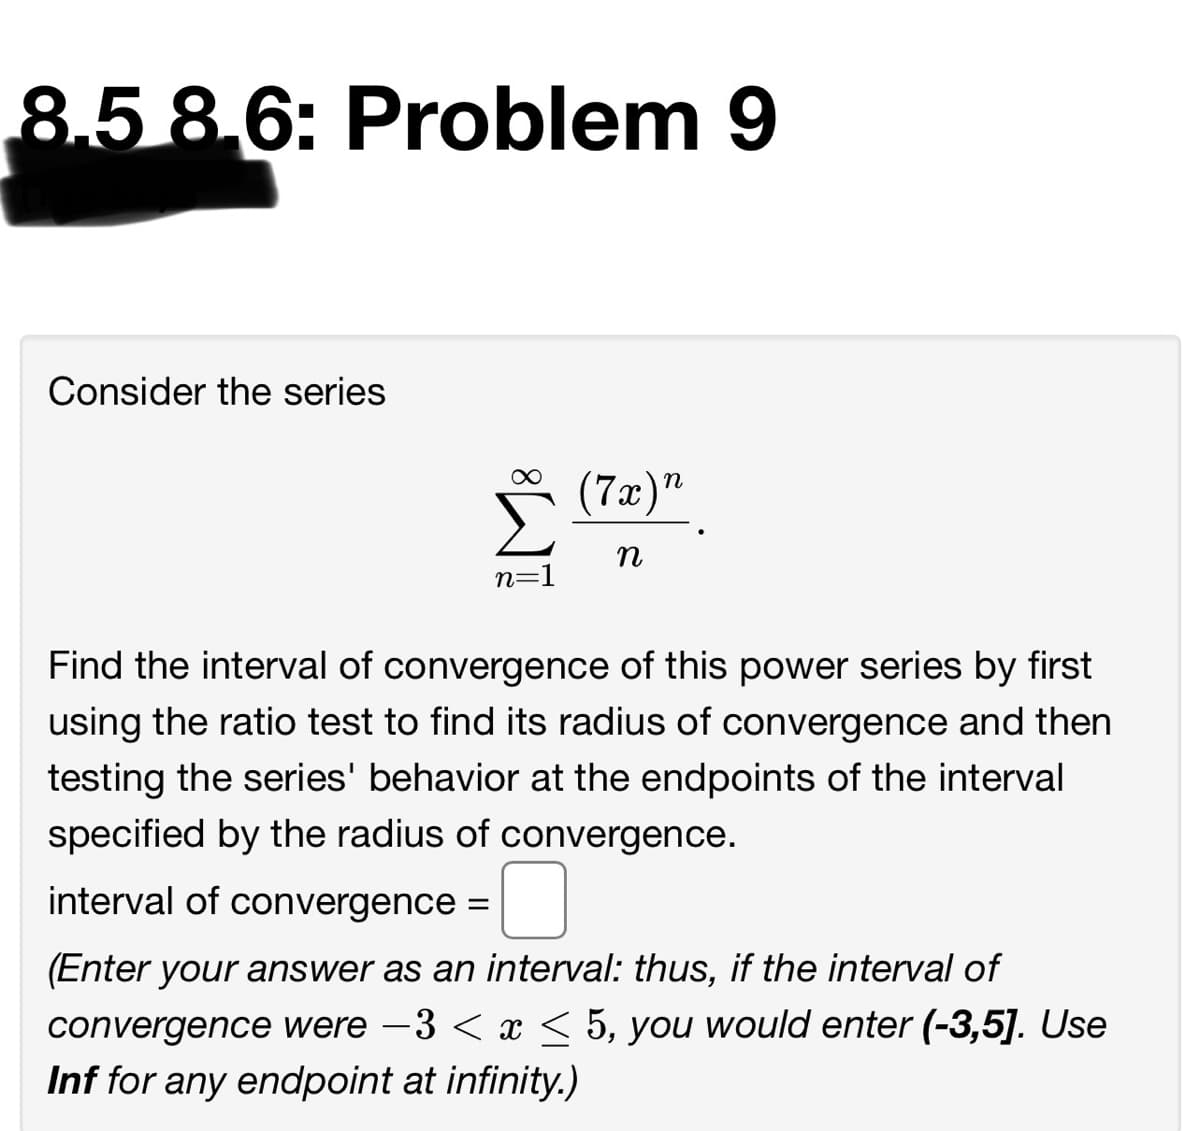 8.5 8,6: Problem 9
Consider the series
(7æ)"
n
n
n=1
Find the interval of convergence of this power series by first
using the ratio test to find its radius of convergence and then
testing the series' behavior at the endpoints of the interval
specified by the radius of convergence.
interval of convergence =
(Enter your answer as an interval: thus, if the interval of
convergence were -3 < x < 5, you would enter (-3,5]. Use
Inf for any endpoint at infinity.)
